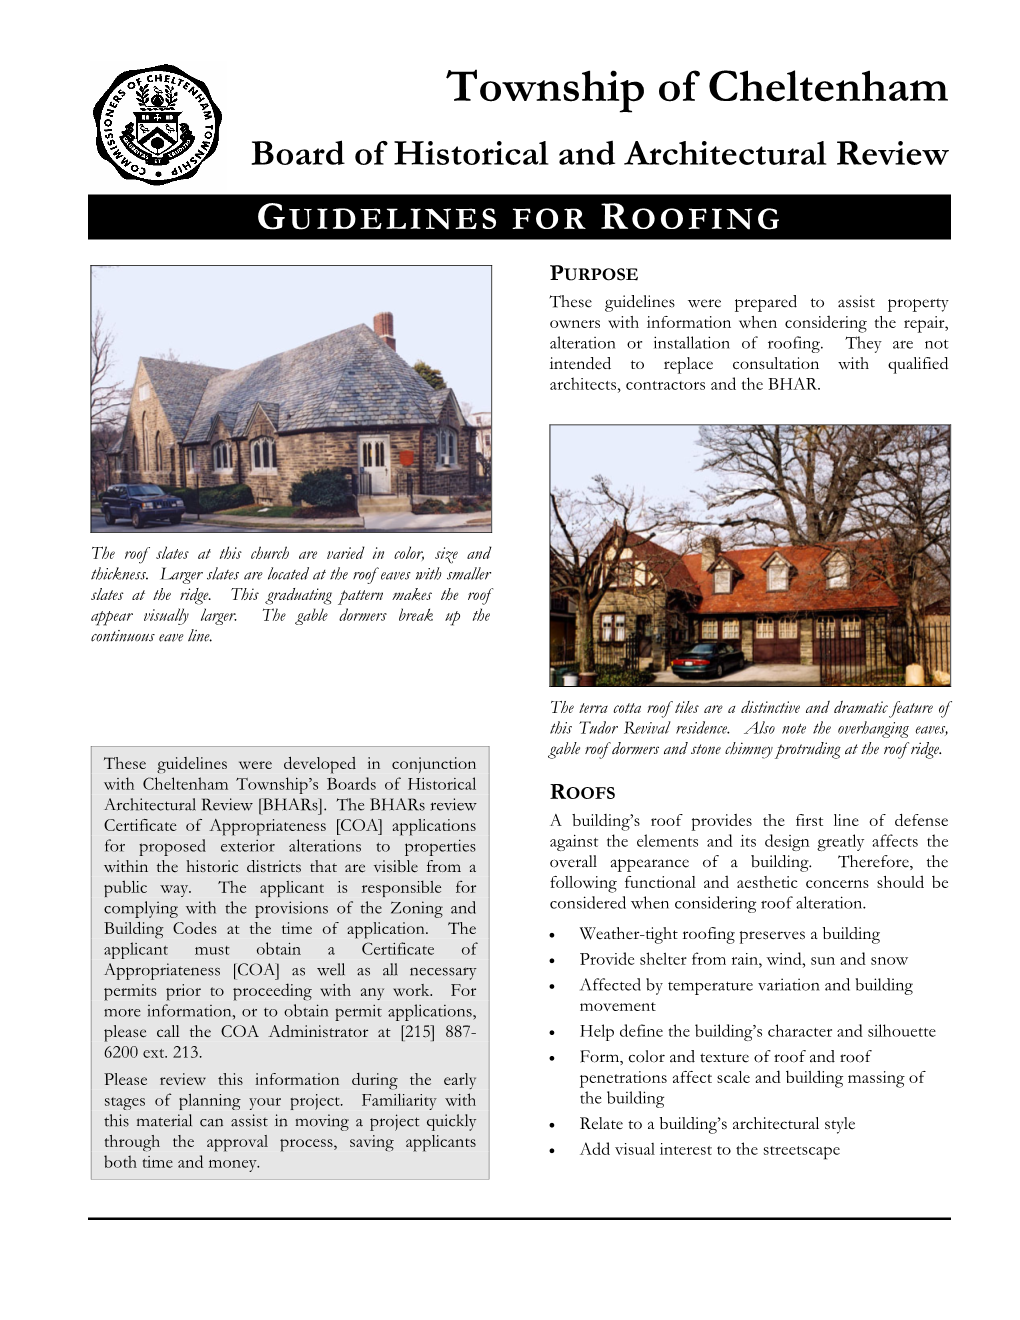 Guidelines for Roofing